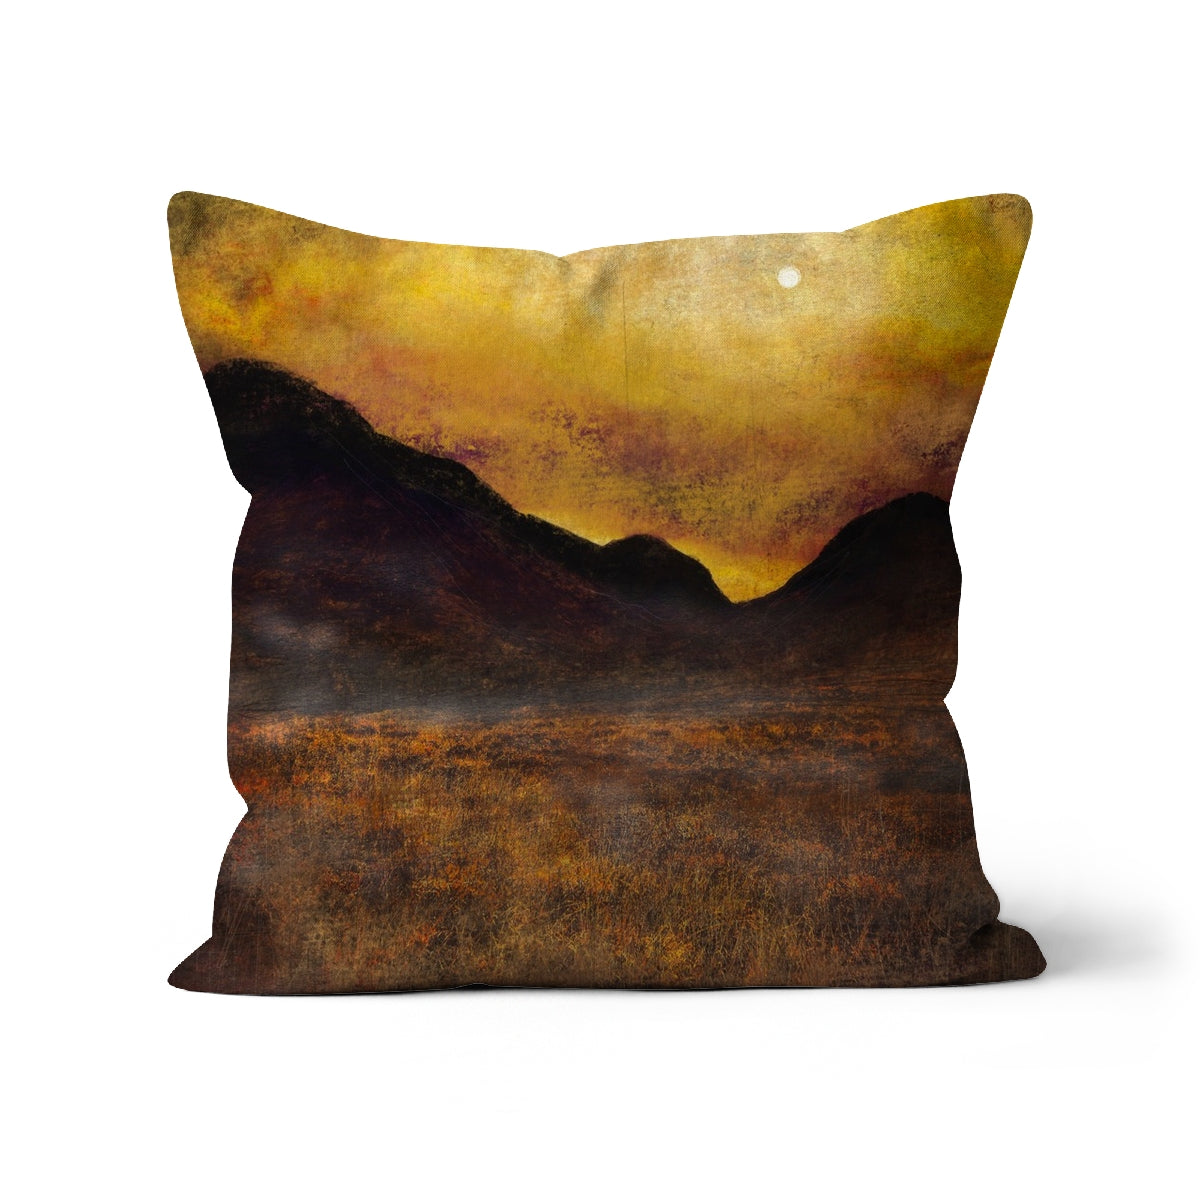 Glencoe Moonlight Art Gifts Cushion-Cushions-Glencoe Art Gallery-Faux Suede-16"x16"-Paintings, Prints, Homeware, Art Gifts From Scotland By Scottish Artist Kevin Hunter